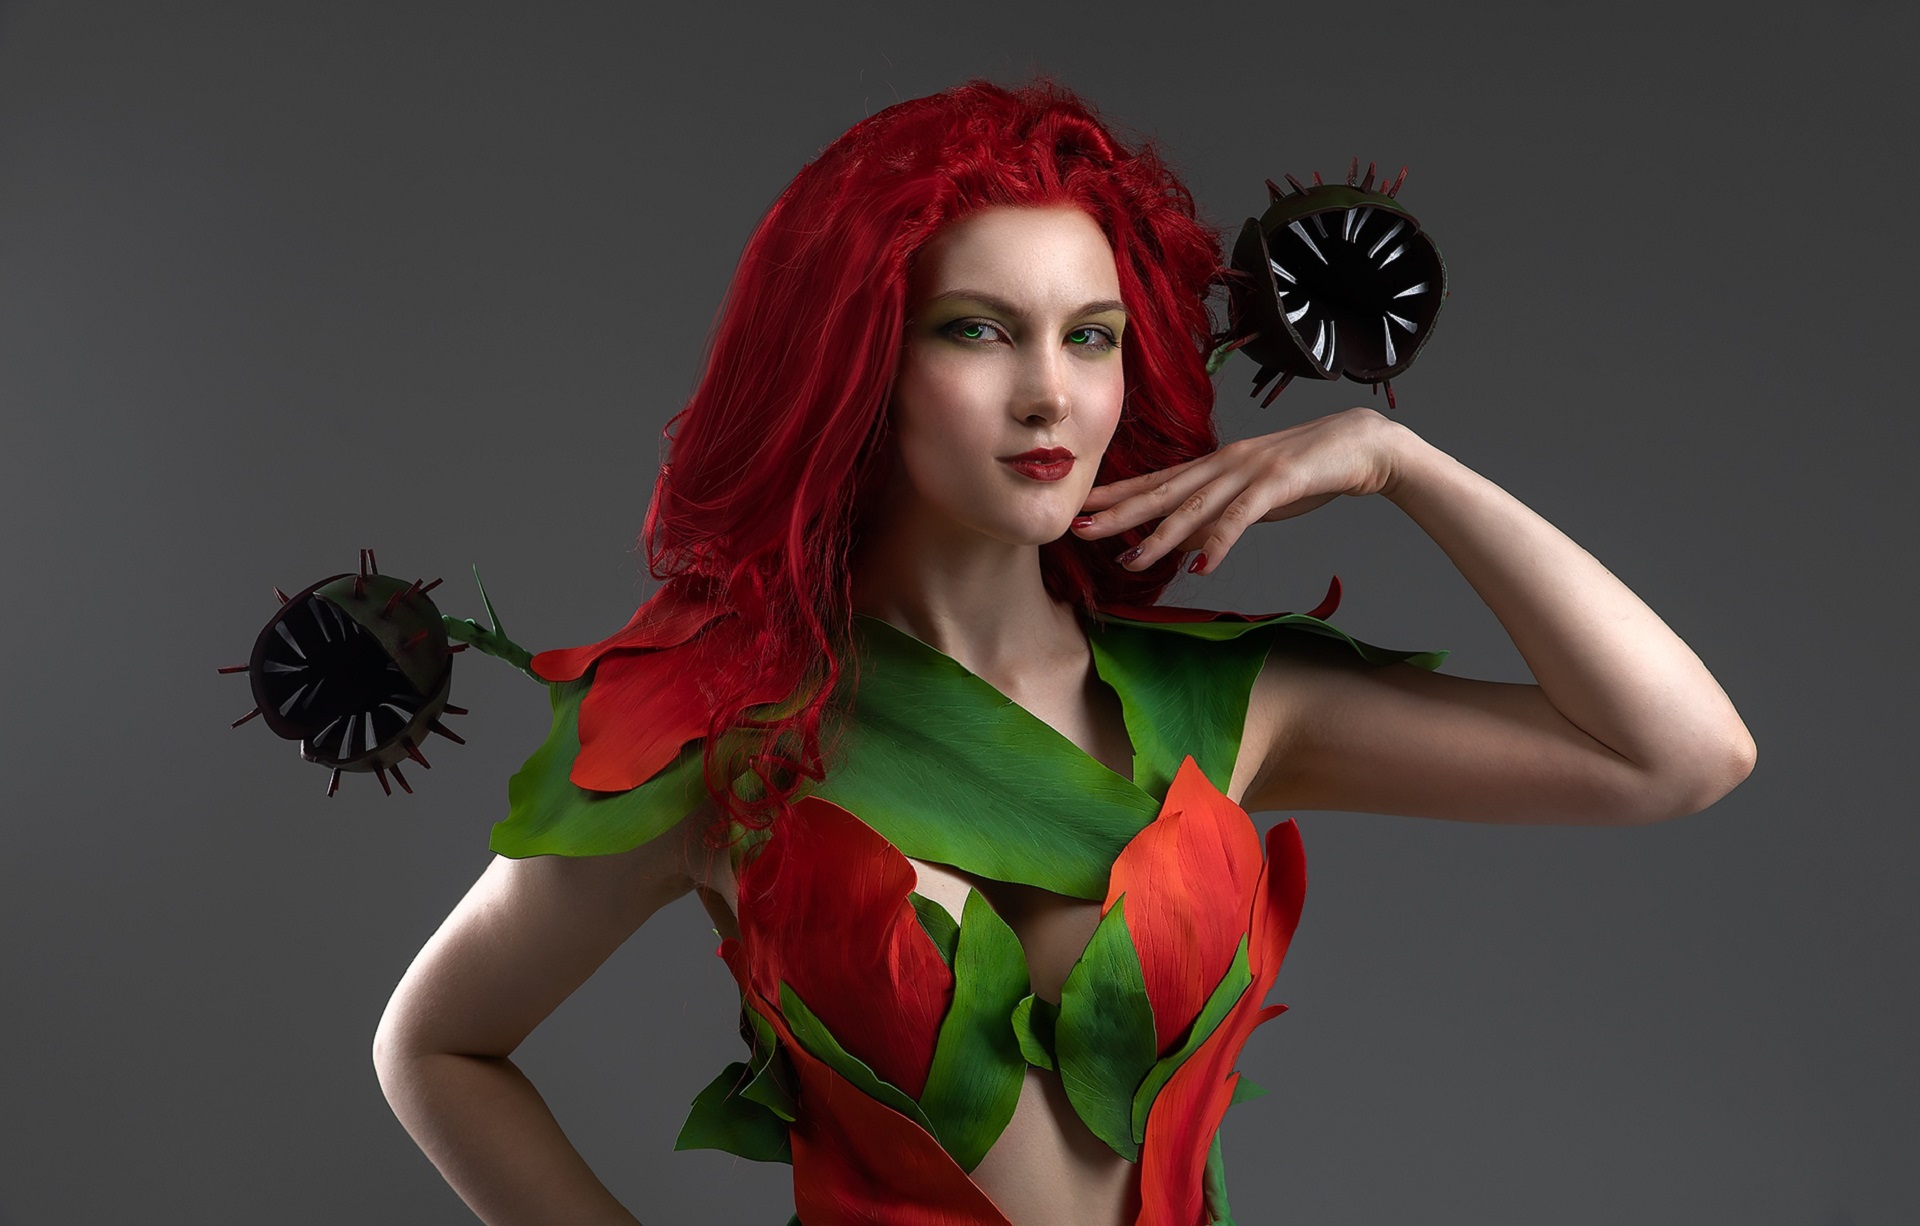 Women Cosplay Injustice 2 Poison Ivy Hd Wallpaper Background - Poison Ivy Injustice 2 , HD Wallpaper & Backgrounds